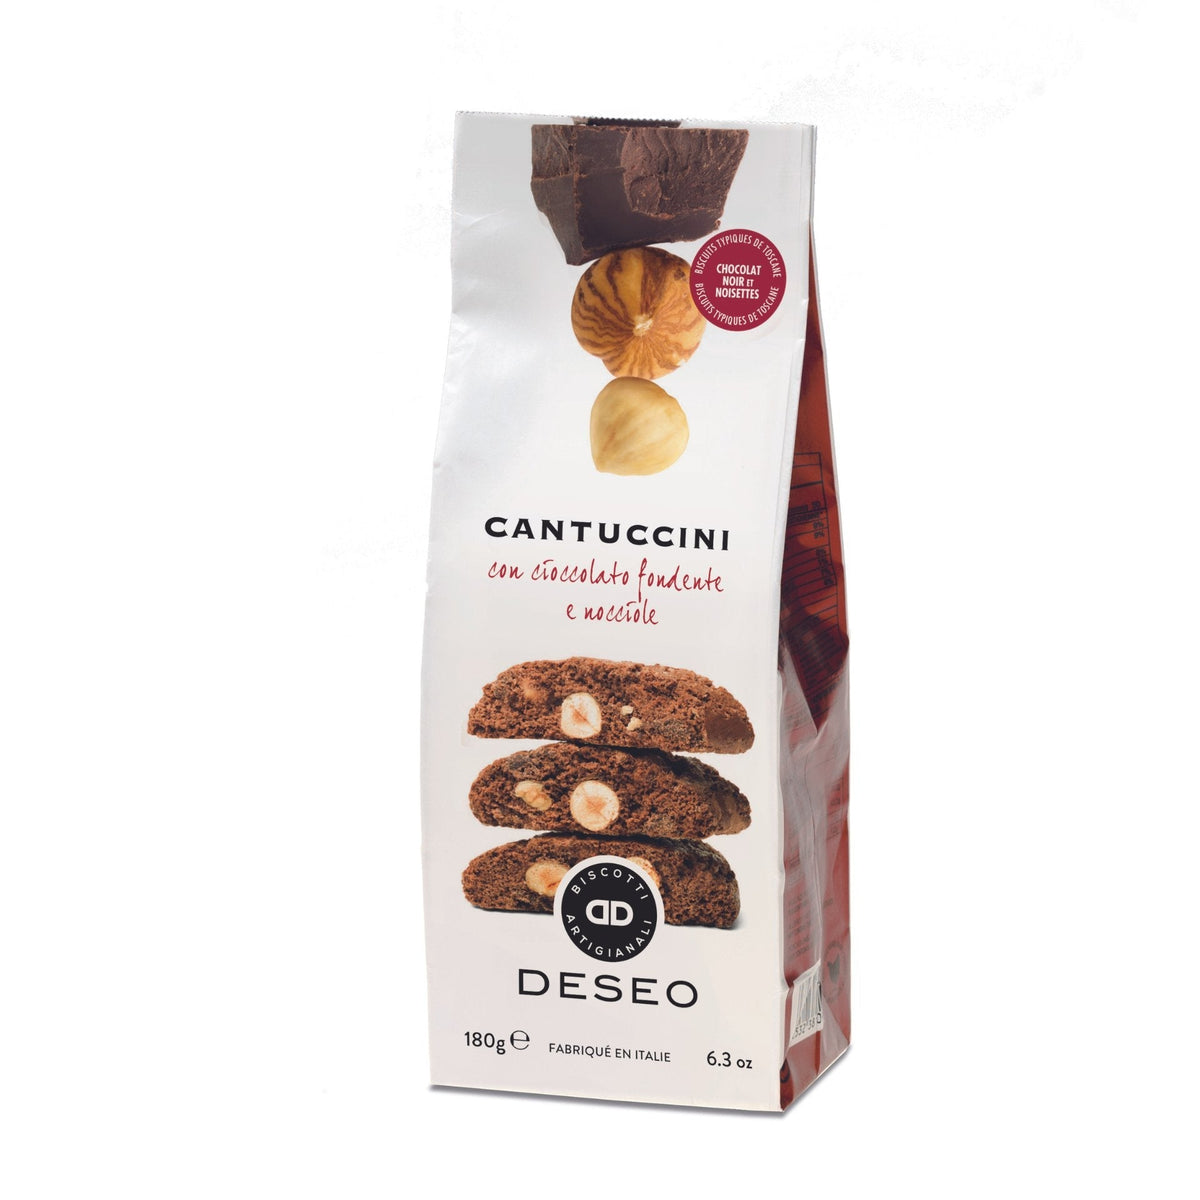 Deseo Cantuccini Toscani with Dark Chocolate &amp; PGI Hazelnuts from Piemonte 180g (Bag)  | Imported and distributed in the UK by Just Gourmet Foods